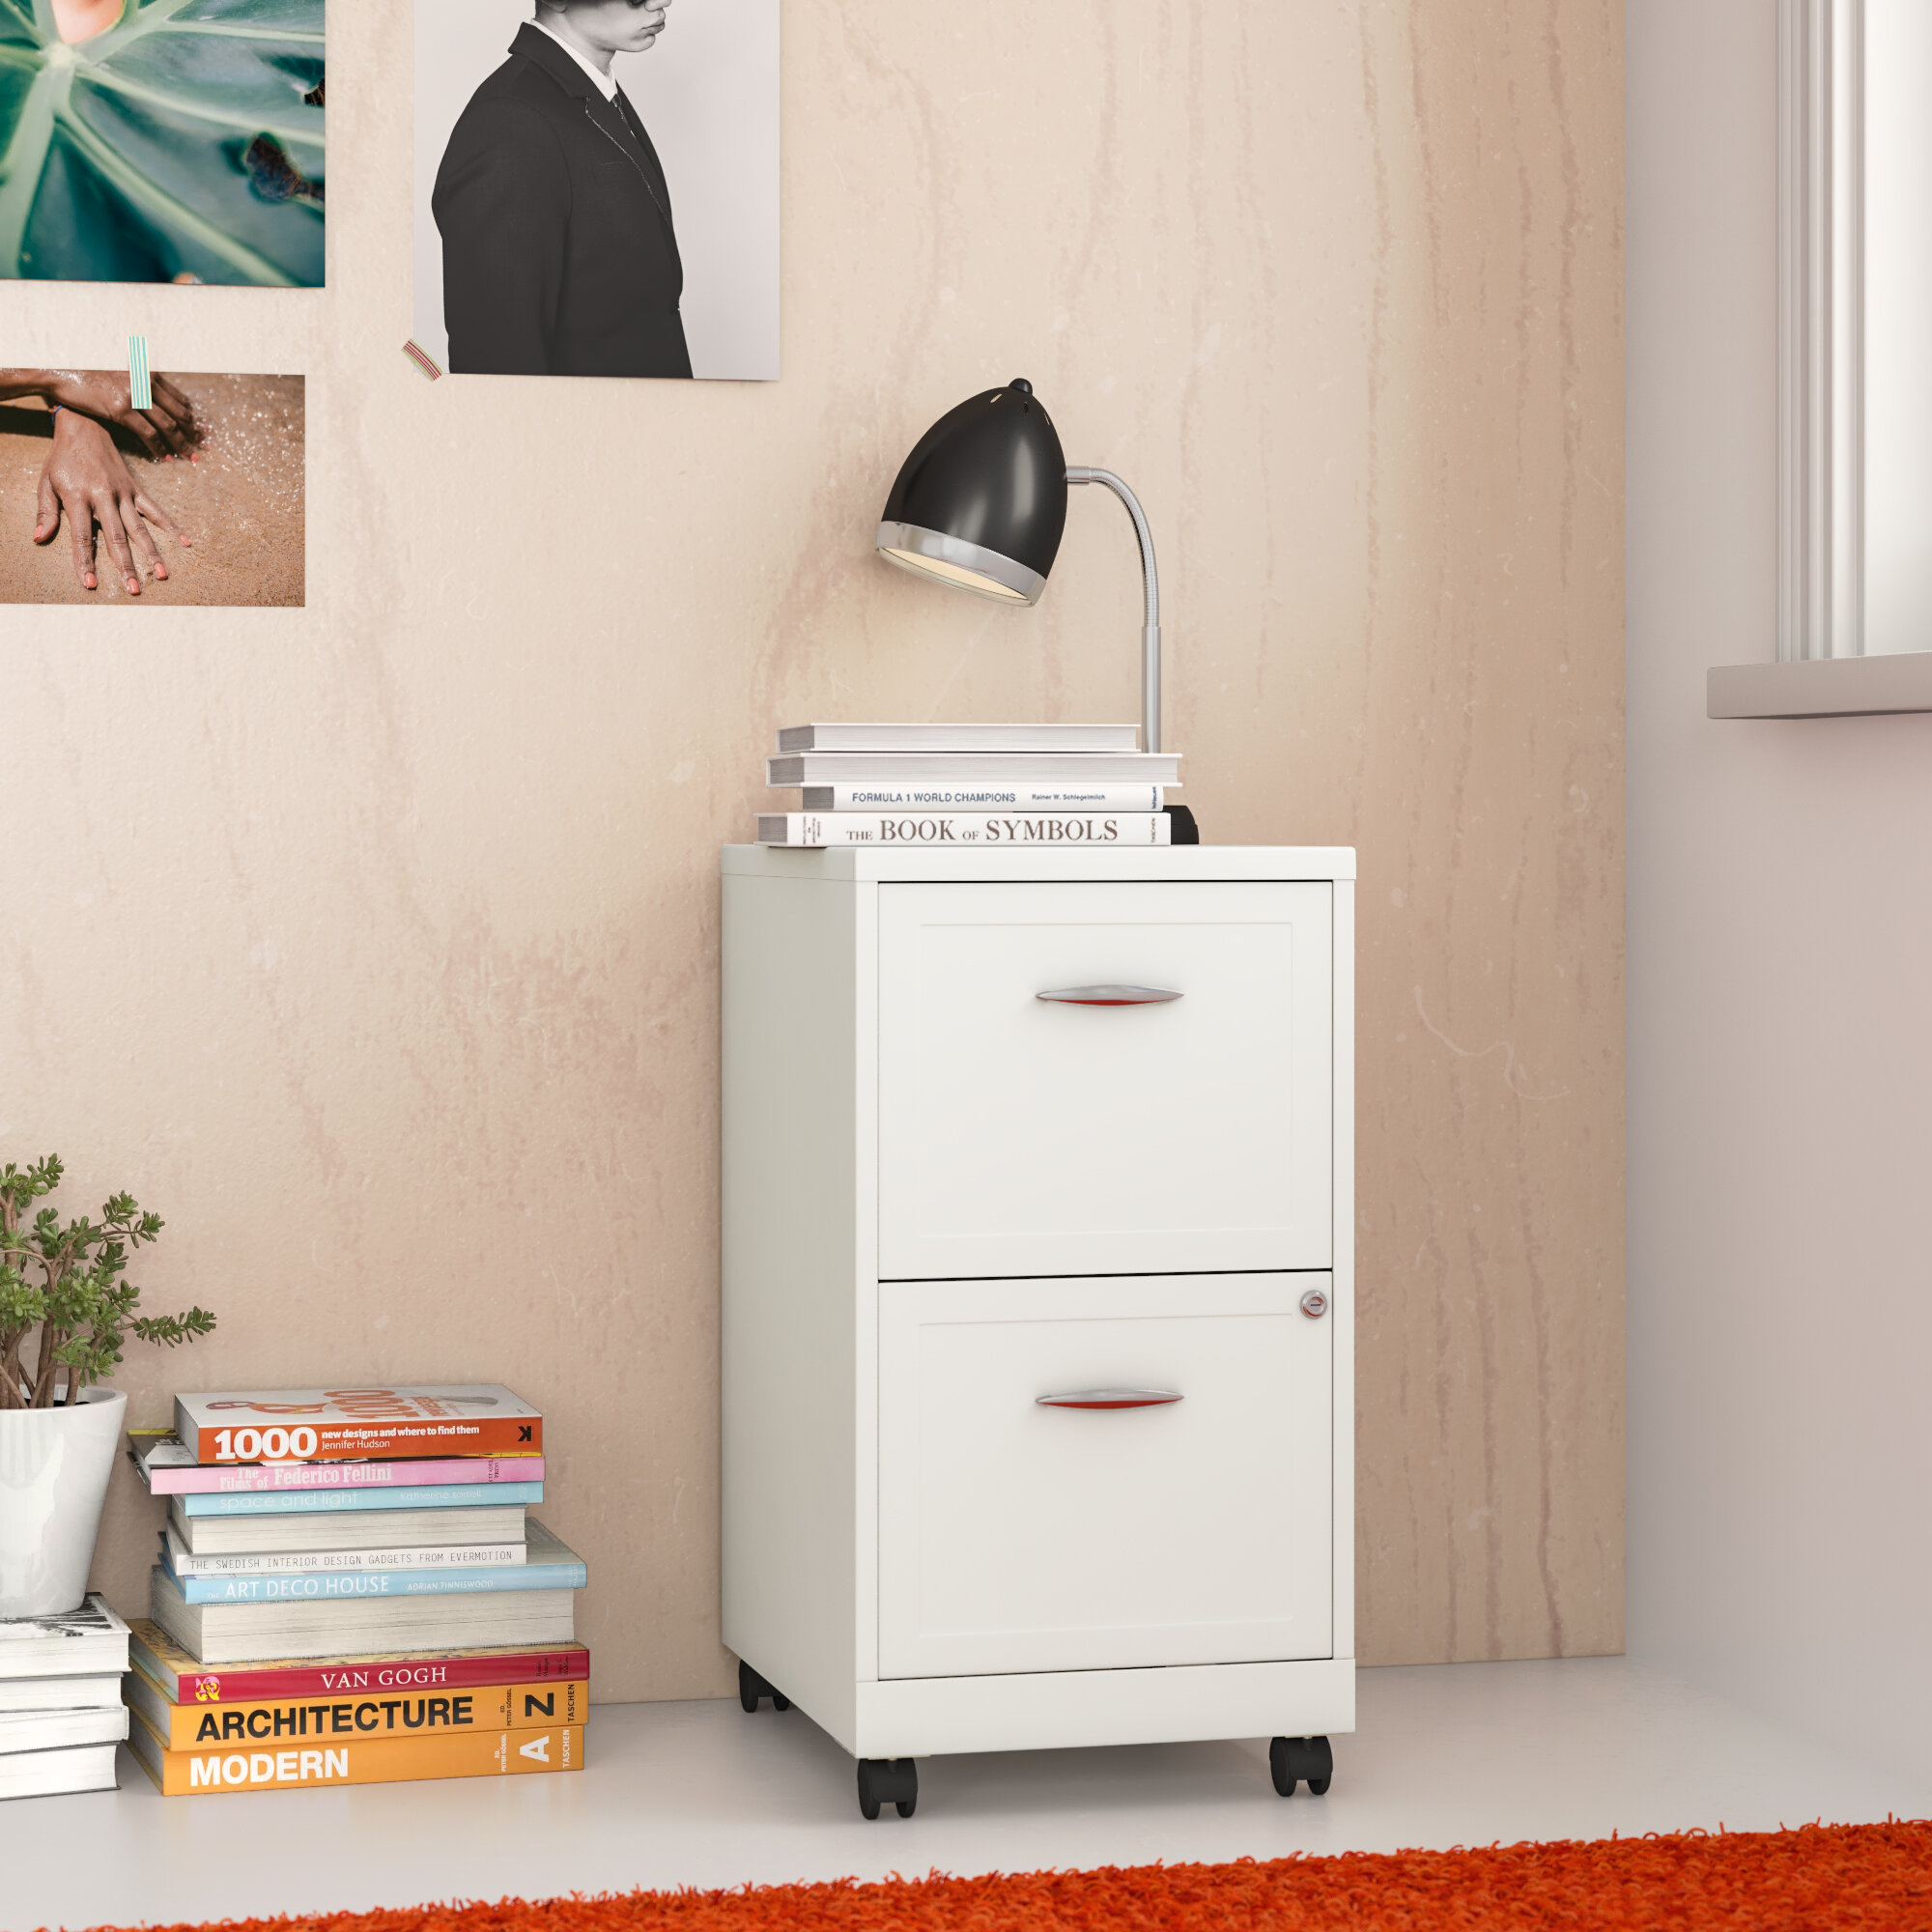 Details about   3 Drawer Mobile File Cabinet Lockable Rolling Filing Cabinets Heavy Duty Steel 